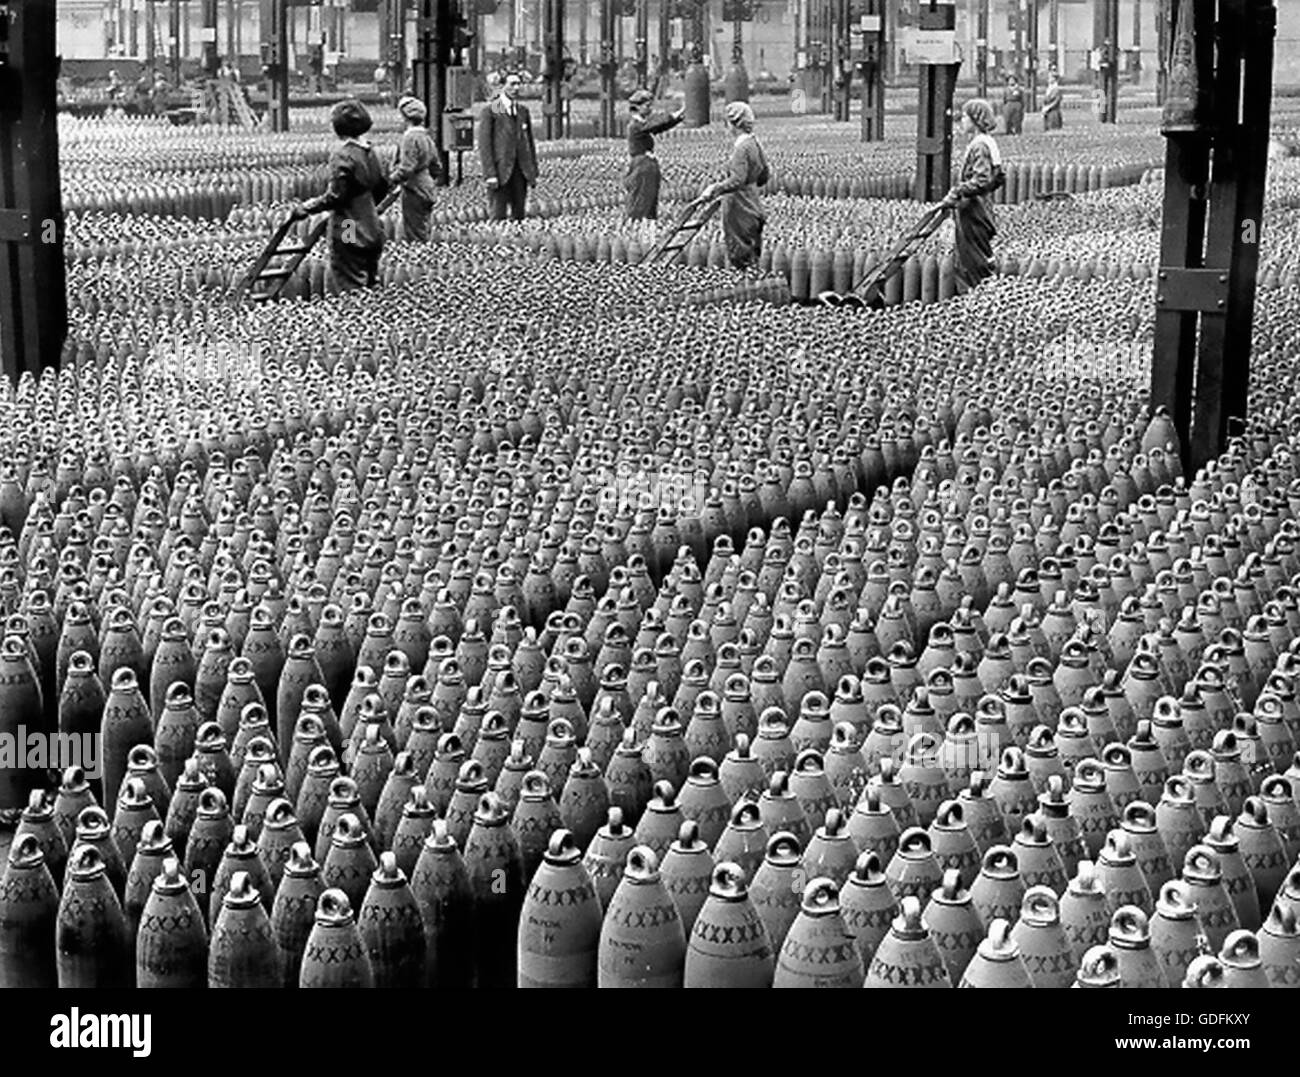 FIRST WORLD WAR  The National Fillings Factory at Chilwell, Nottingham, England in 1917. The women are moving 6 inch howitzer shells in one of the warehouses. Official War Office photo by Horace Nicholls. Stock Photo